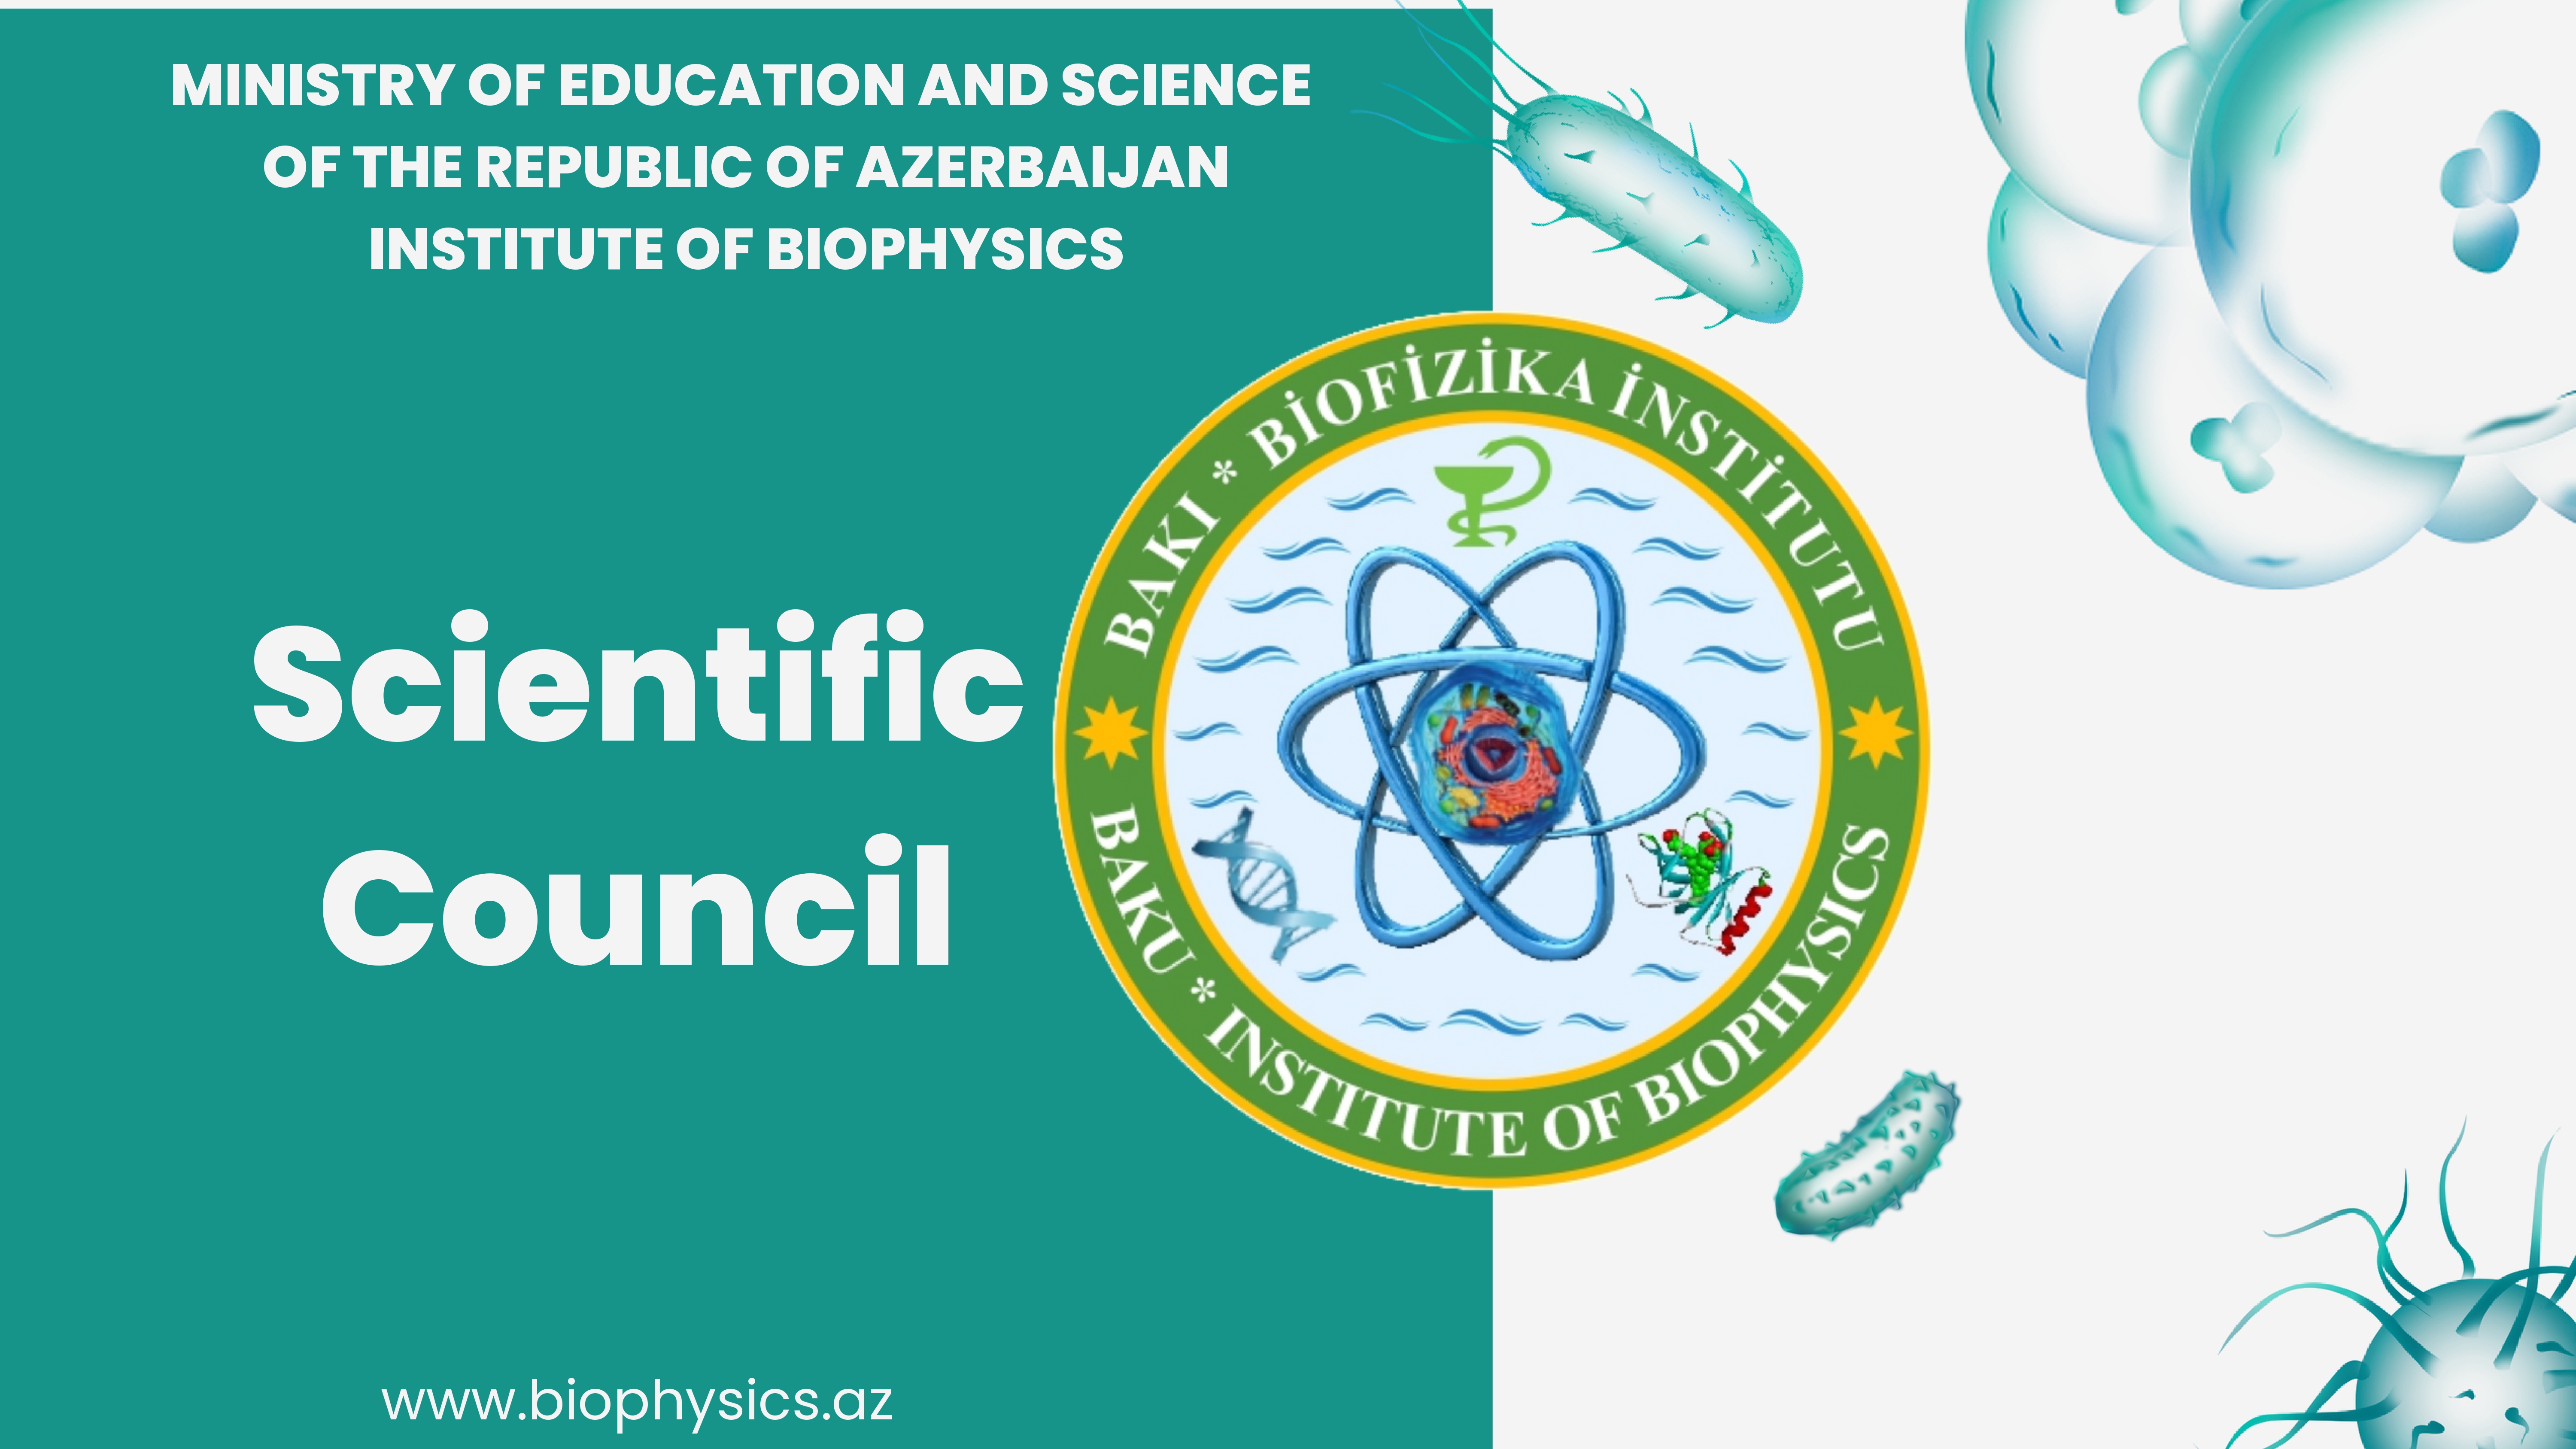 The next meeting of the Scientific Council will be held